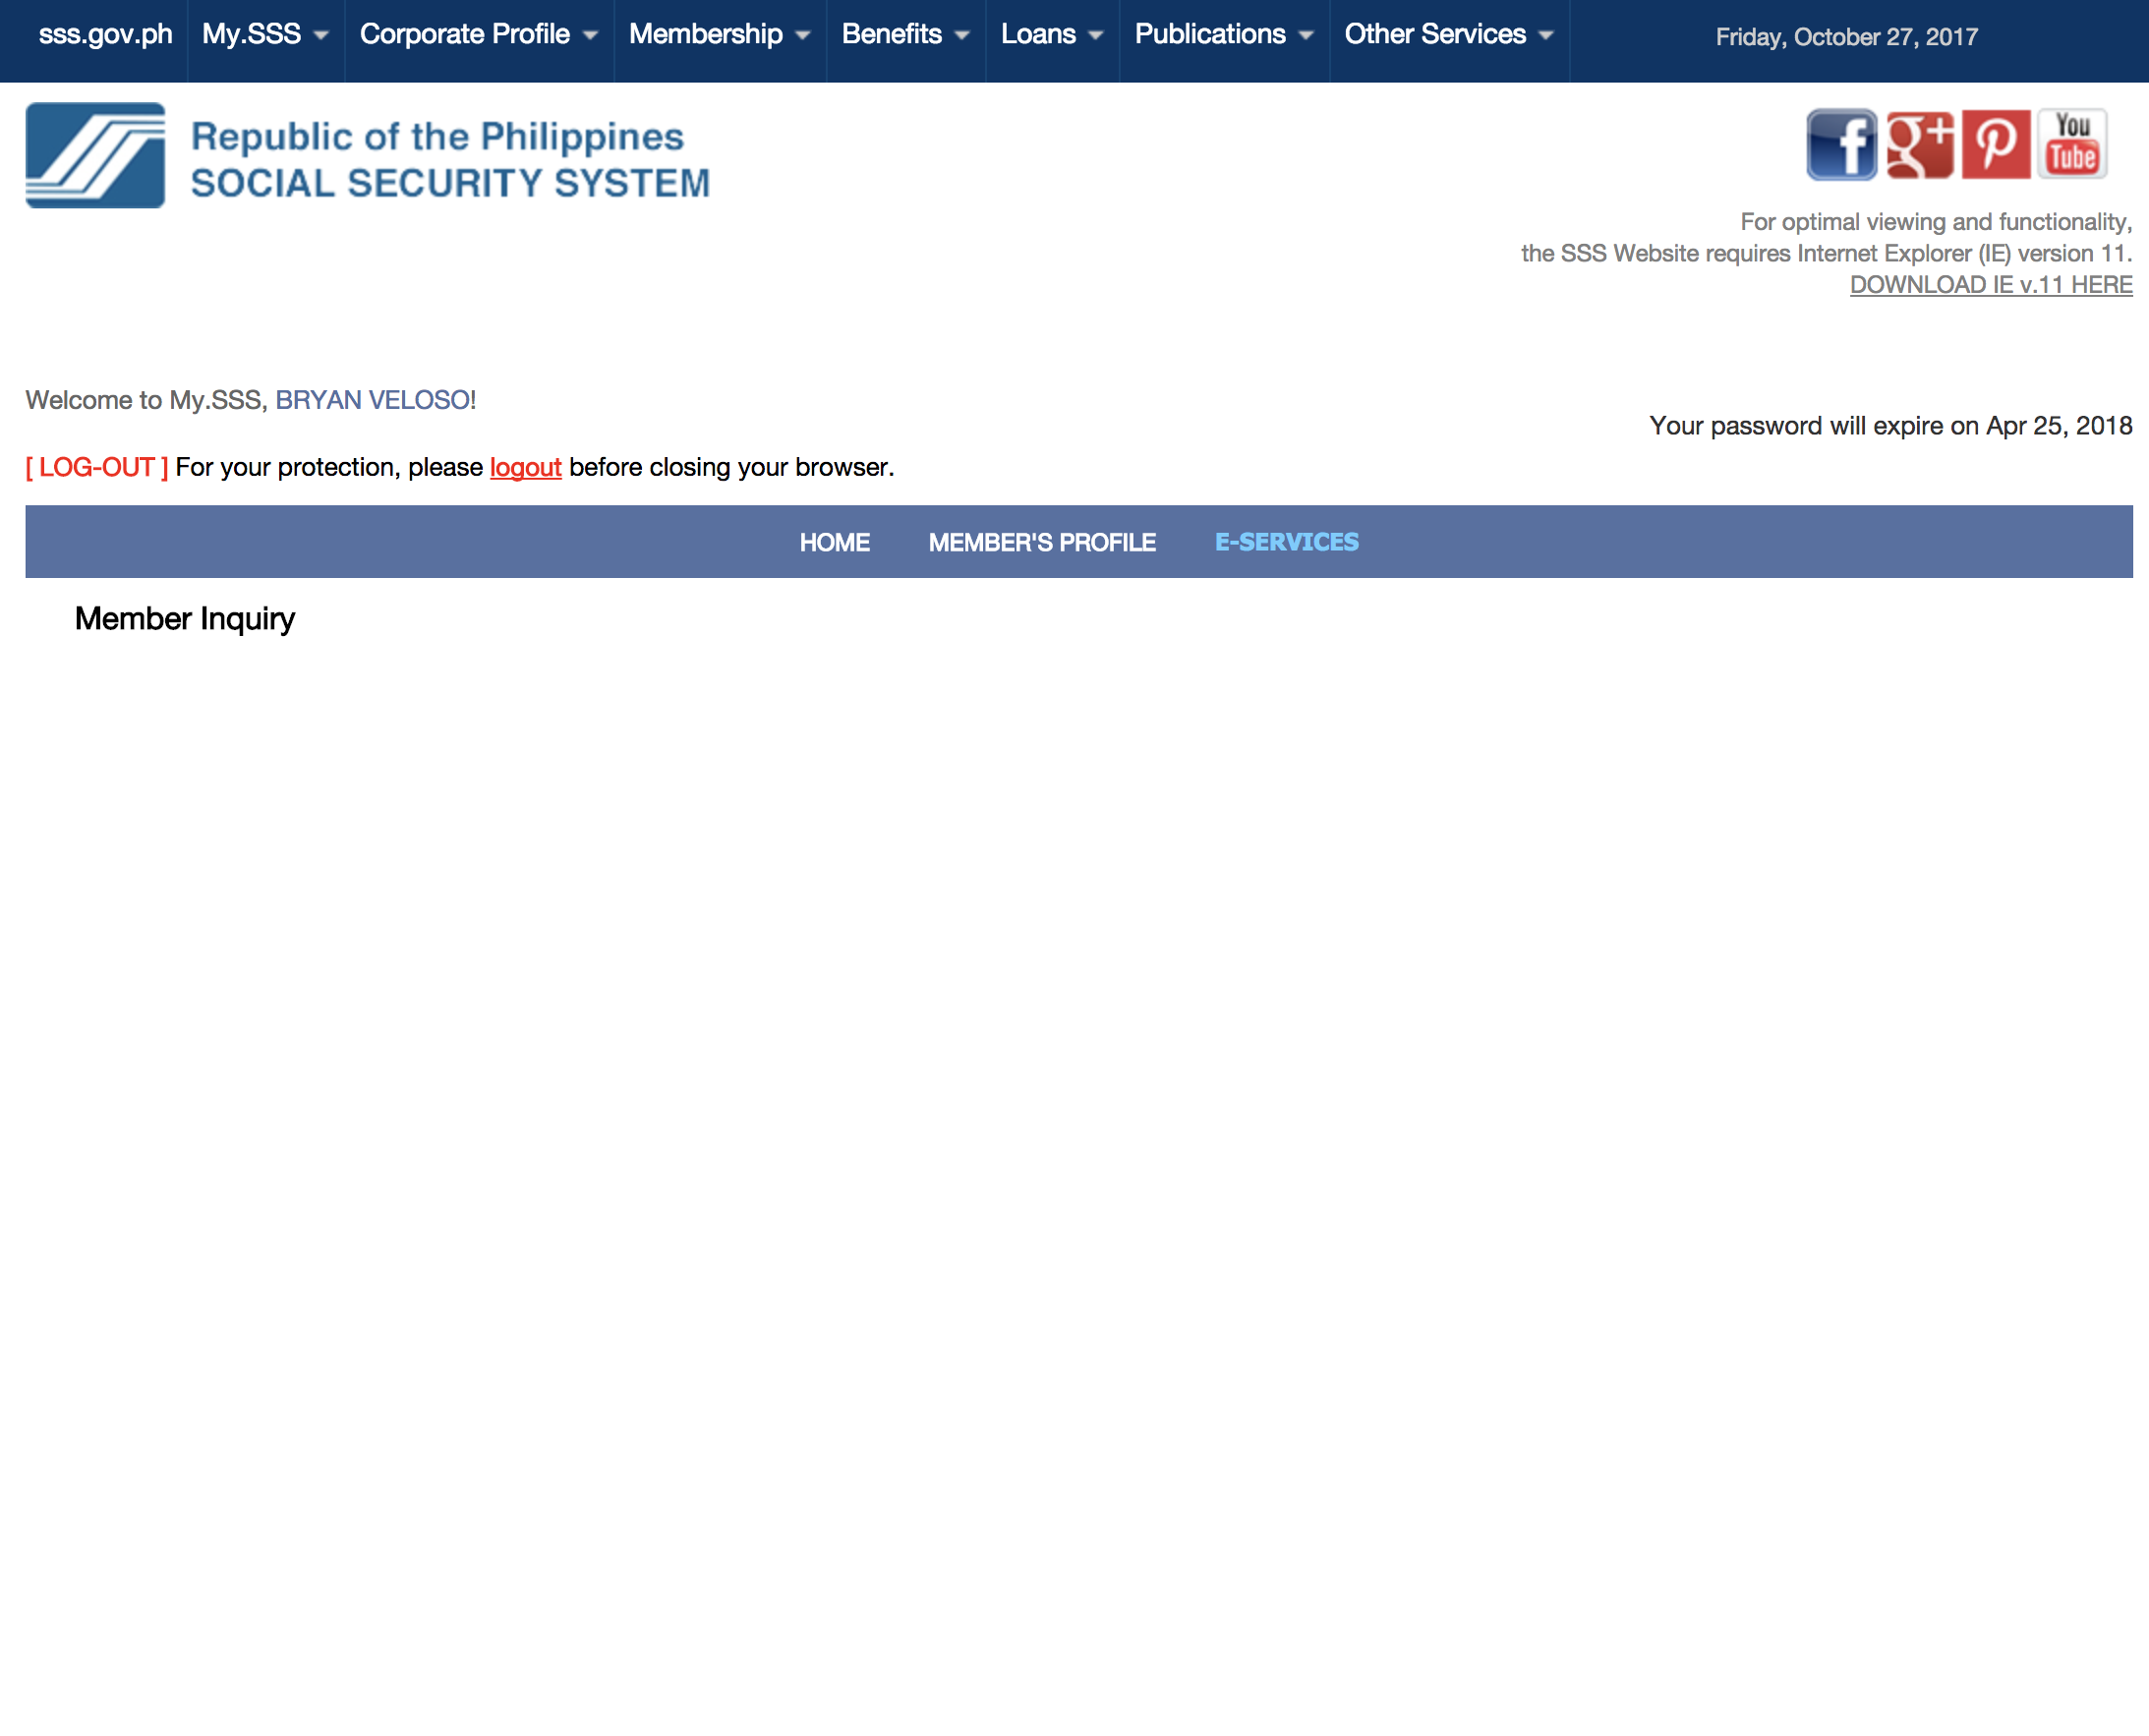 SSS e-services inquiry page is blank!